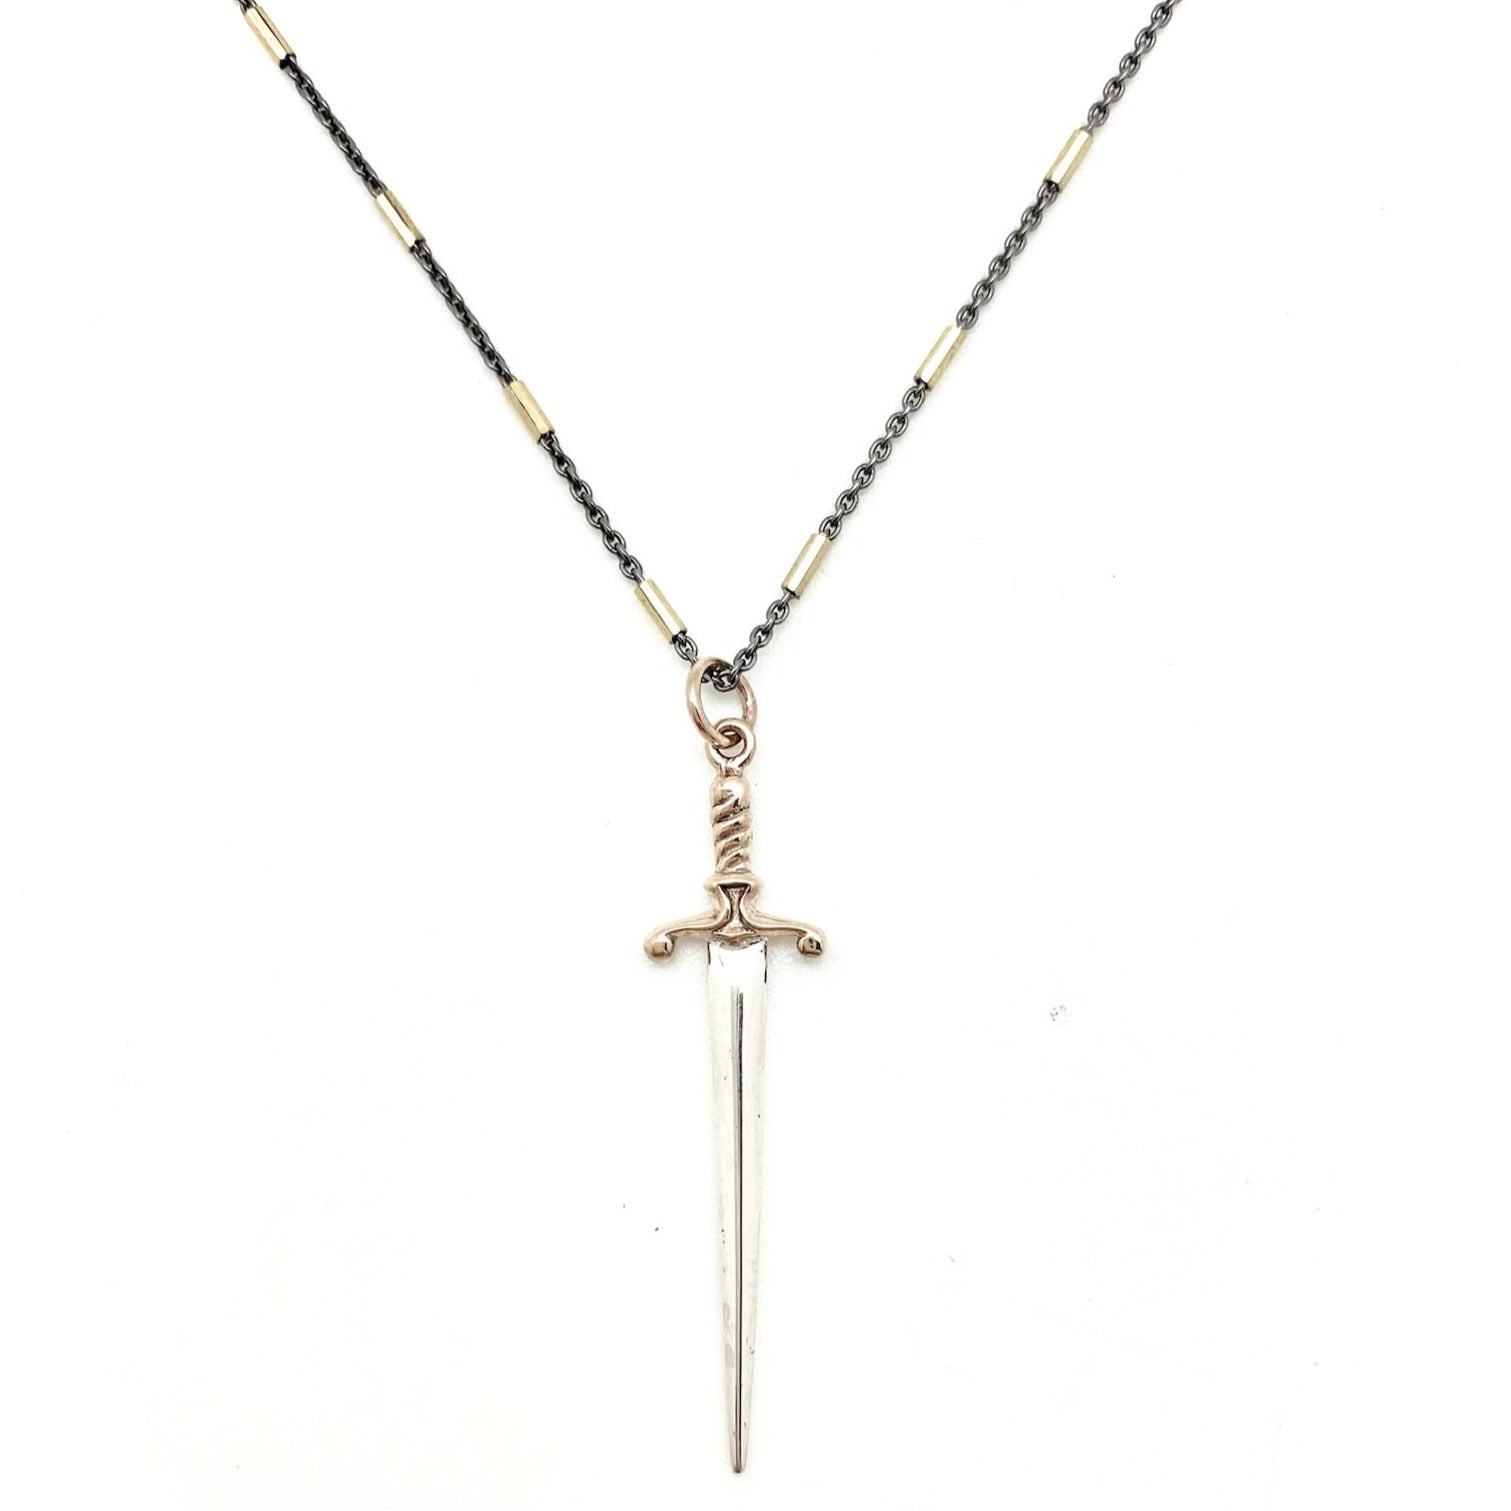 Degs & Sal 24 inch Sterling Silver Dagger Pendant on Box Chain Necklace NWT  | eBay